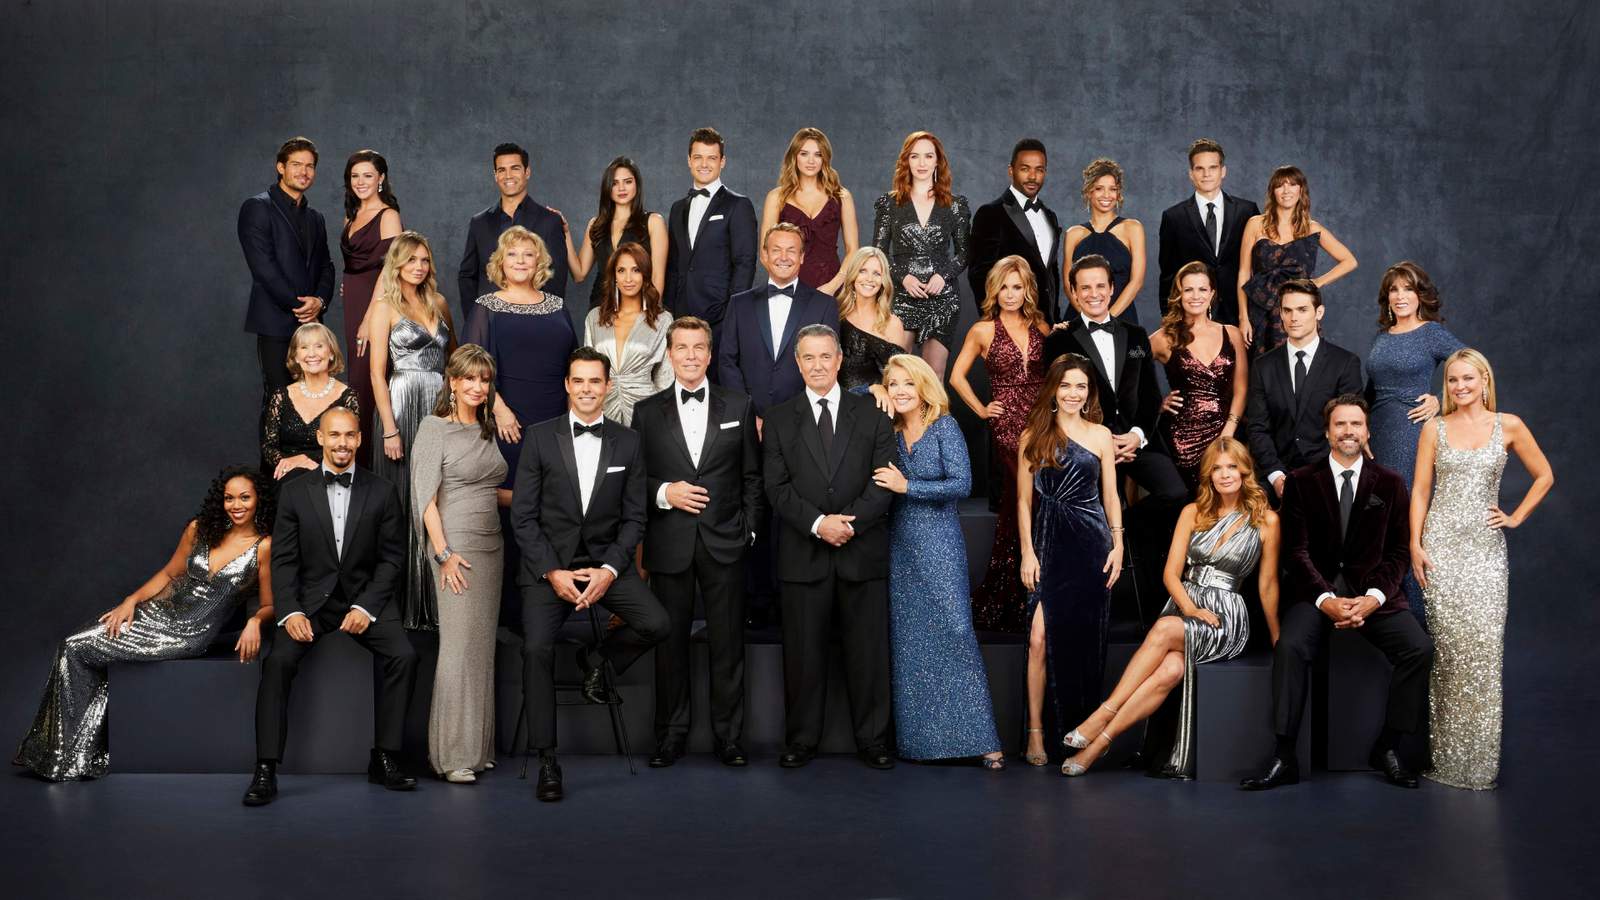 ‘The Young and the Restless’ returns with new episodes Aug. 10